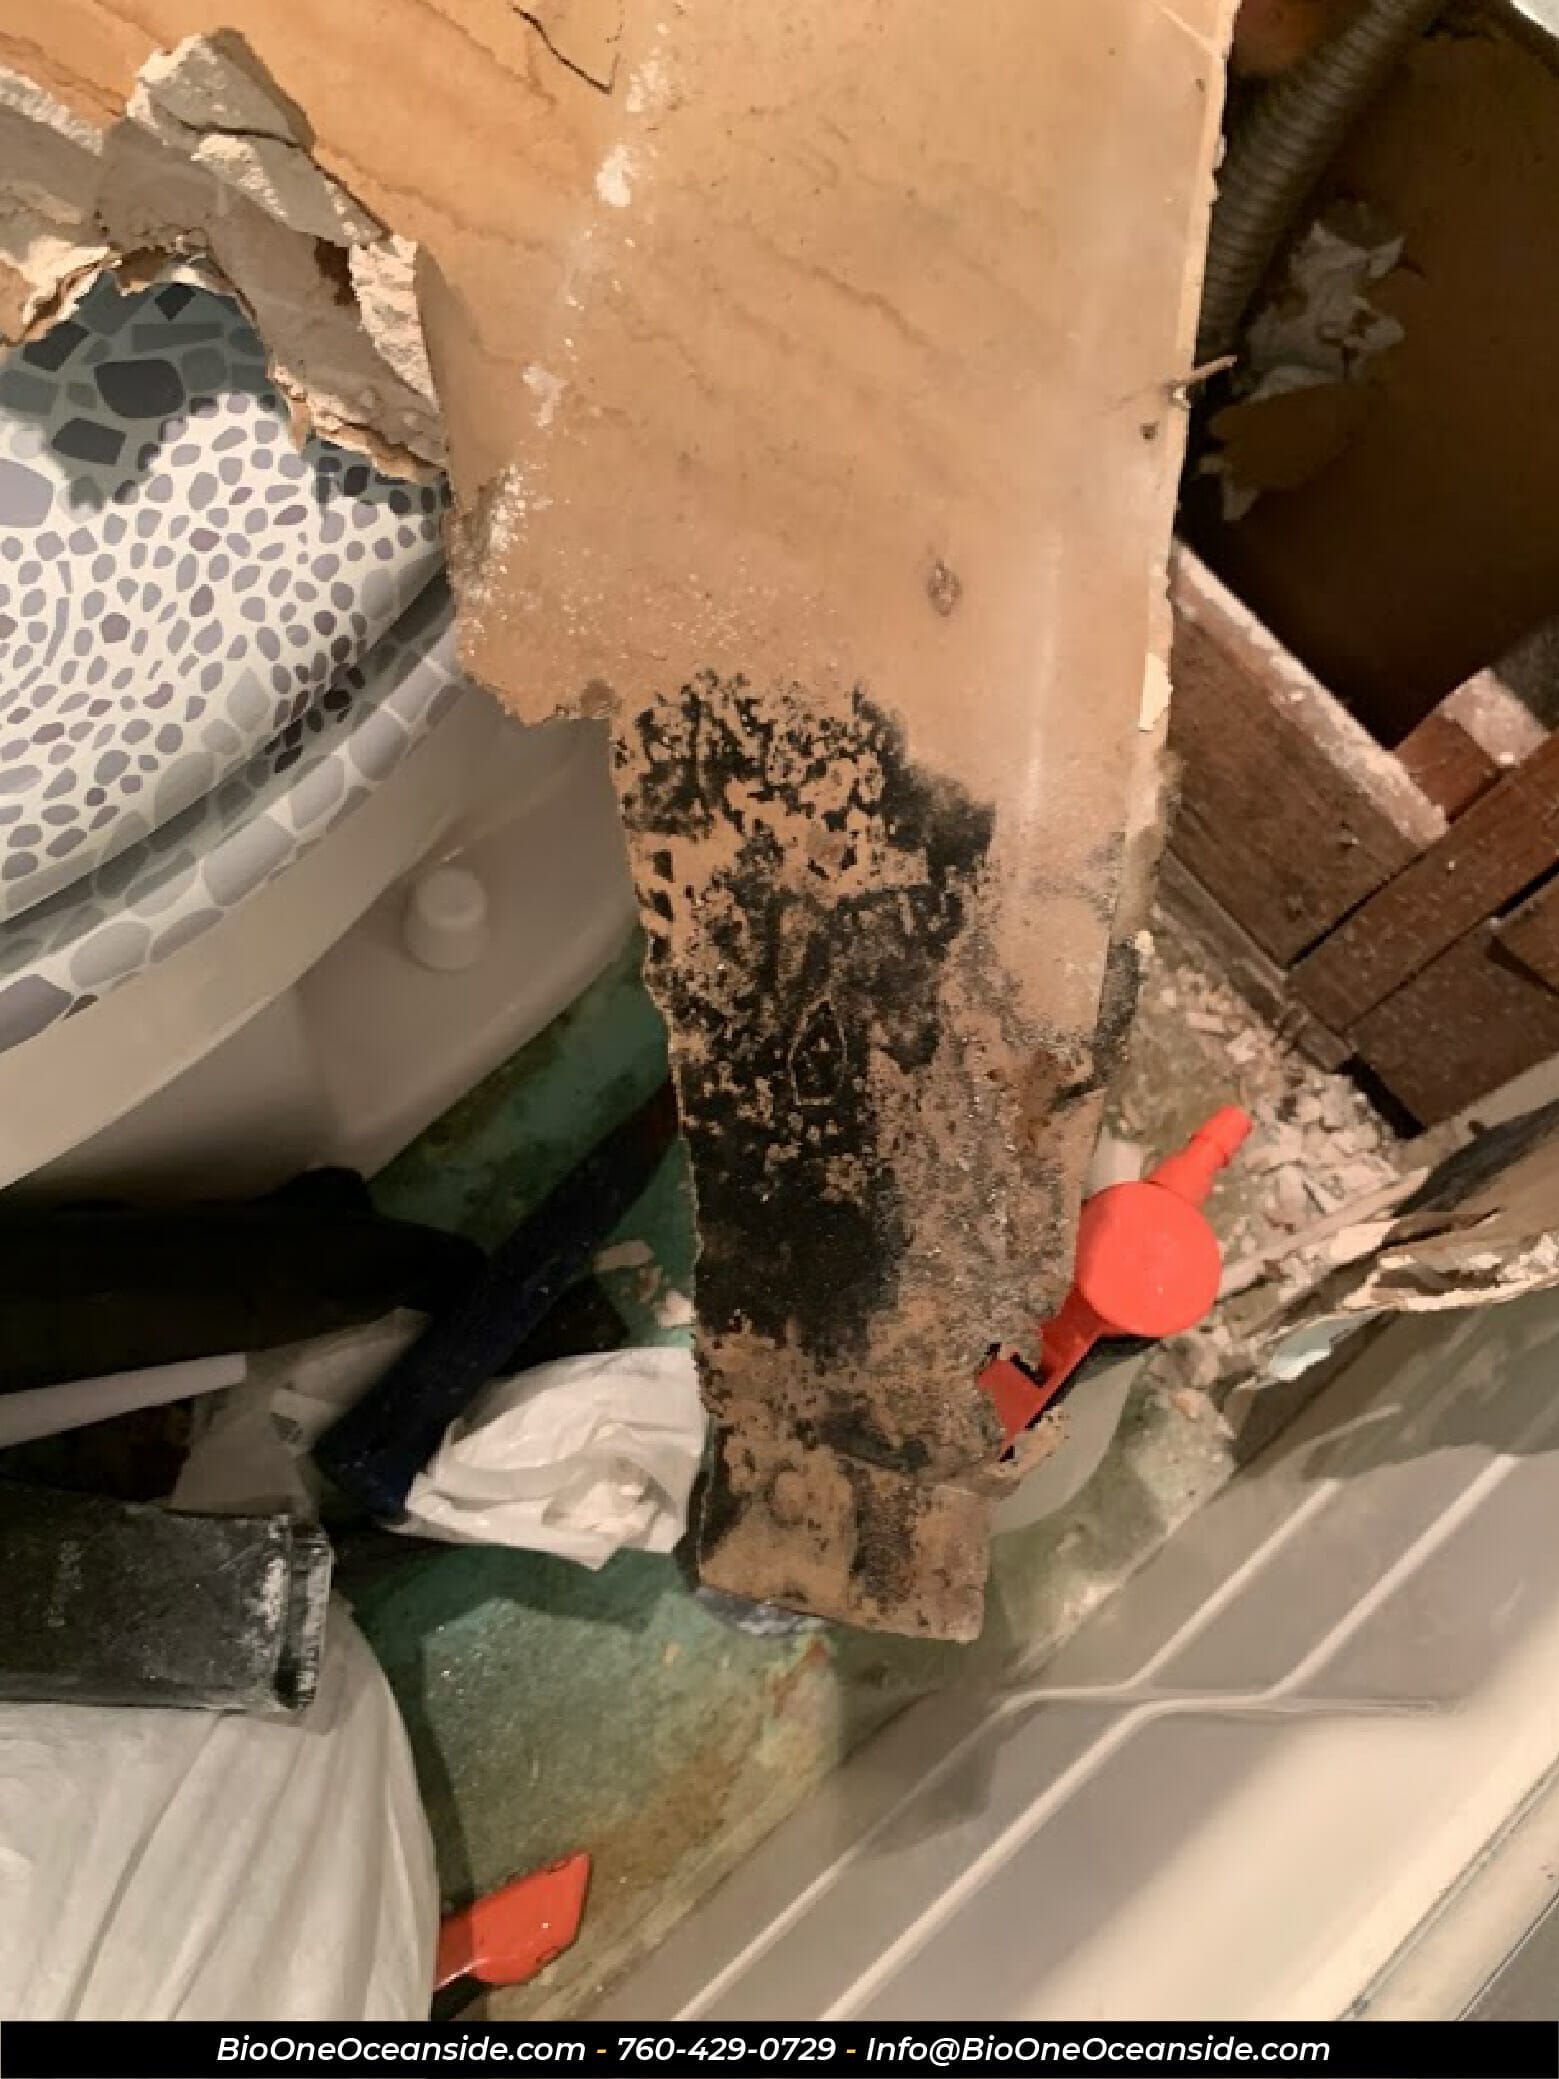 Mold and water damage. Photo credit: Bio-One of Oceanside.